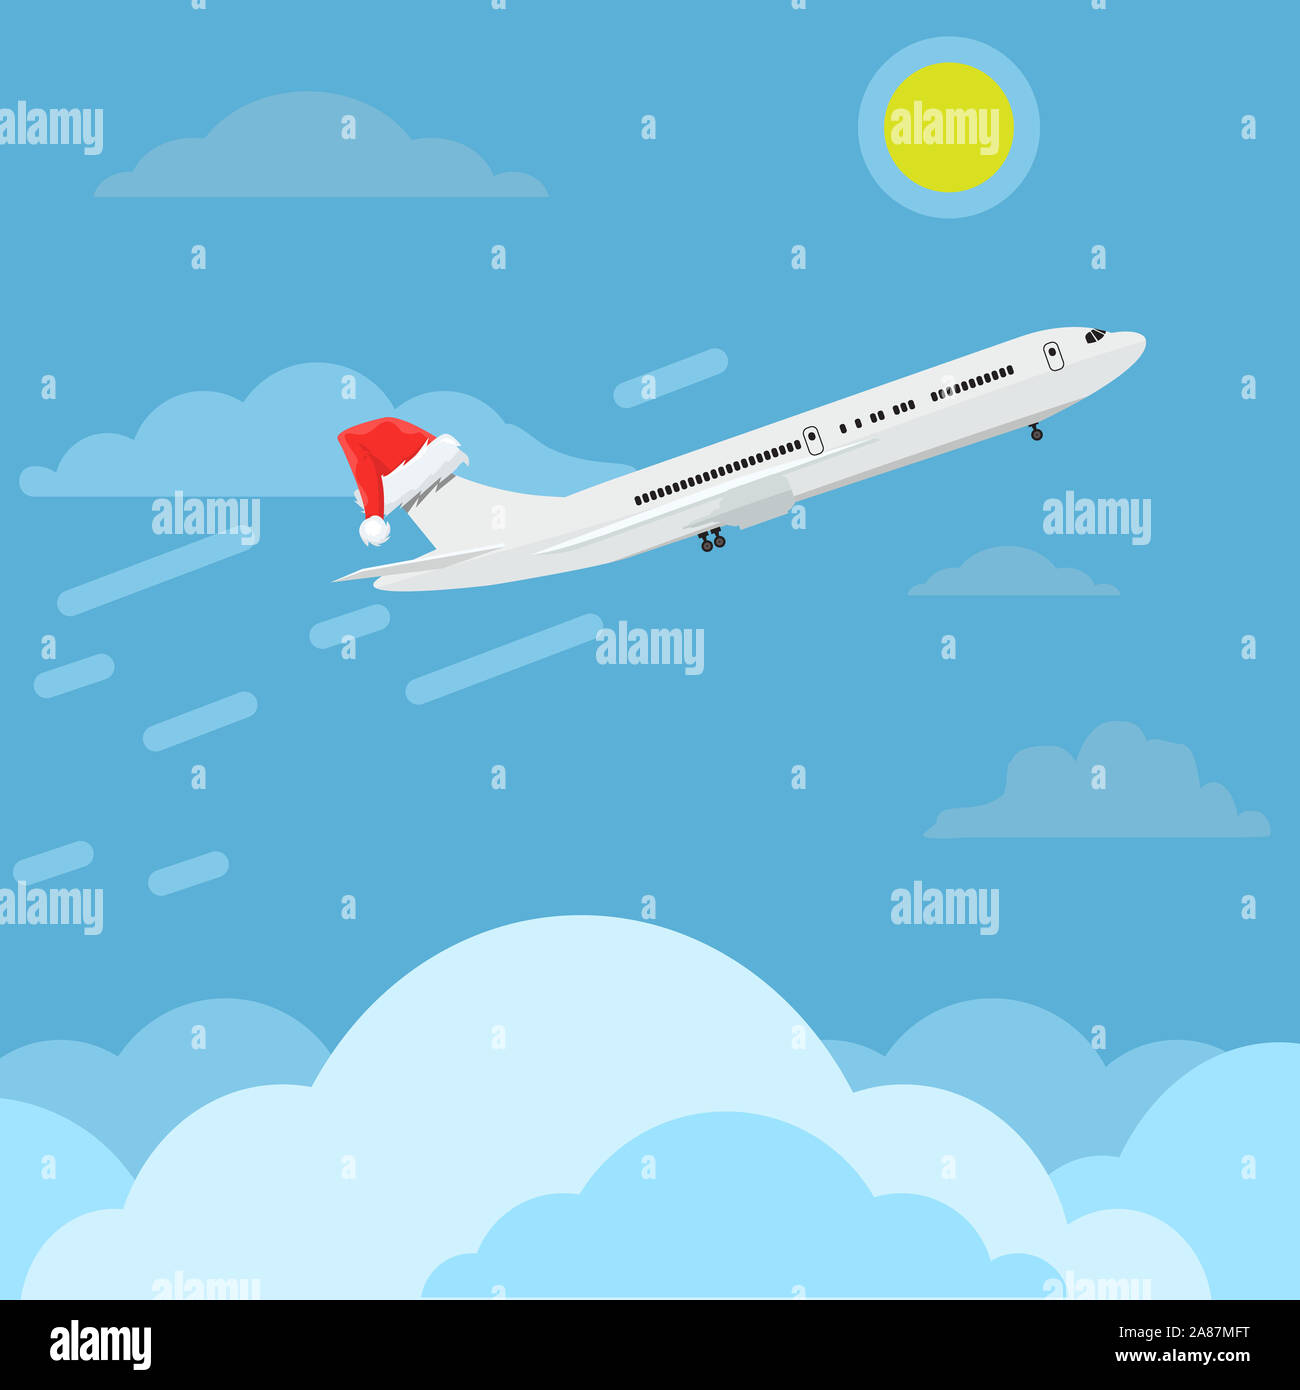 Airplane with santa claus cap or hat flying in sky. Travel and christmas concept ads design. illustration. Stock Photo